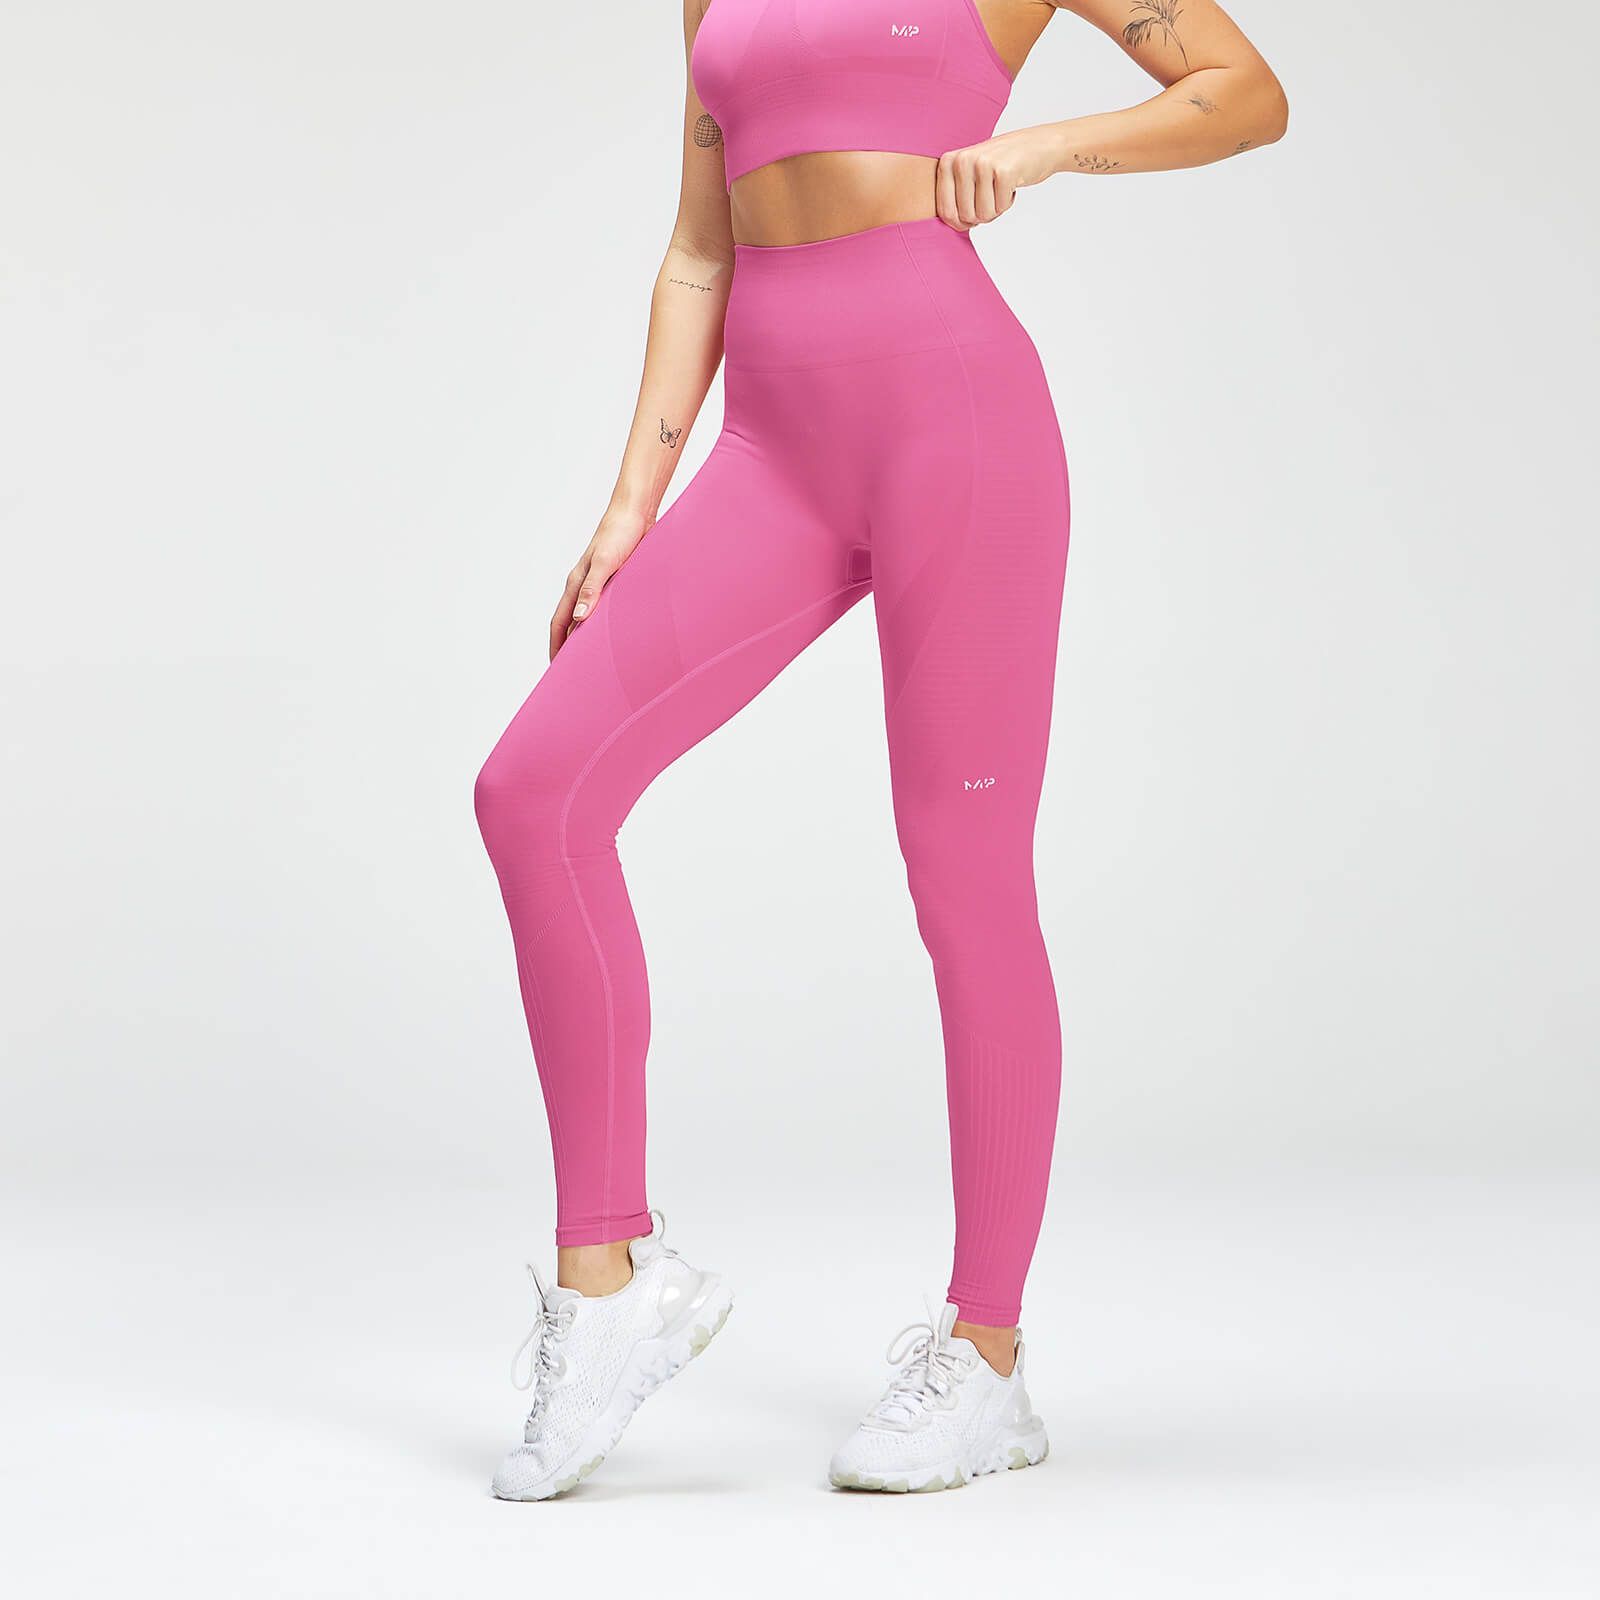 Introducing our NEW high waisted and sculpting Tempo Seamless leggings, optimised for high energy and impact interval and agility training.

The leggings are part of a vibrant matching collection and have a soft knitted seamless design and zonal ventilation. Their hydropholic finish ensure maximum sweat-wicking making them perfect for high sweat training.